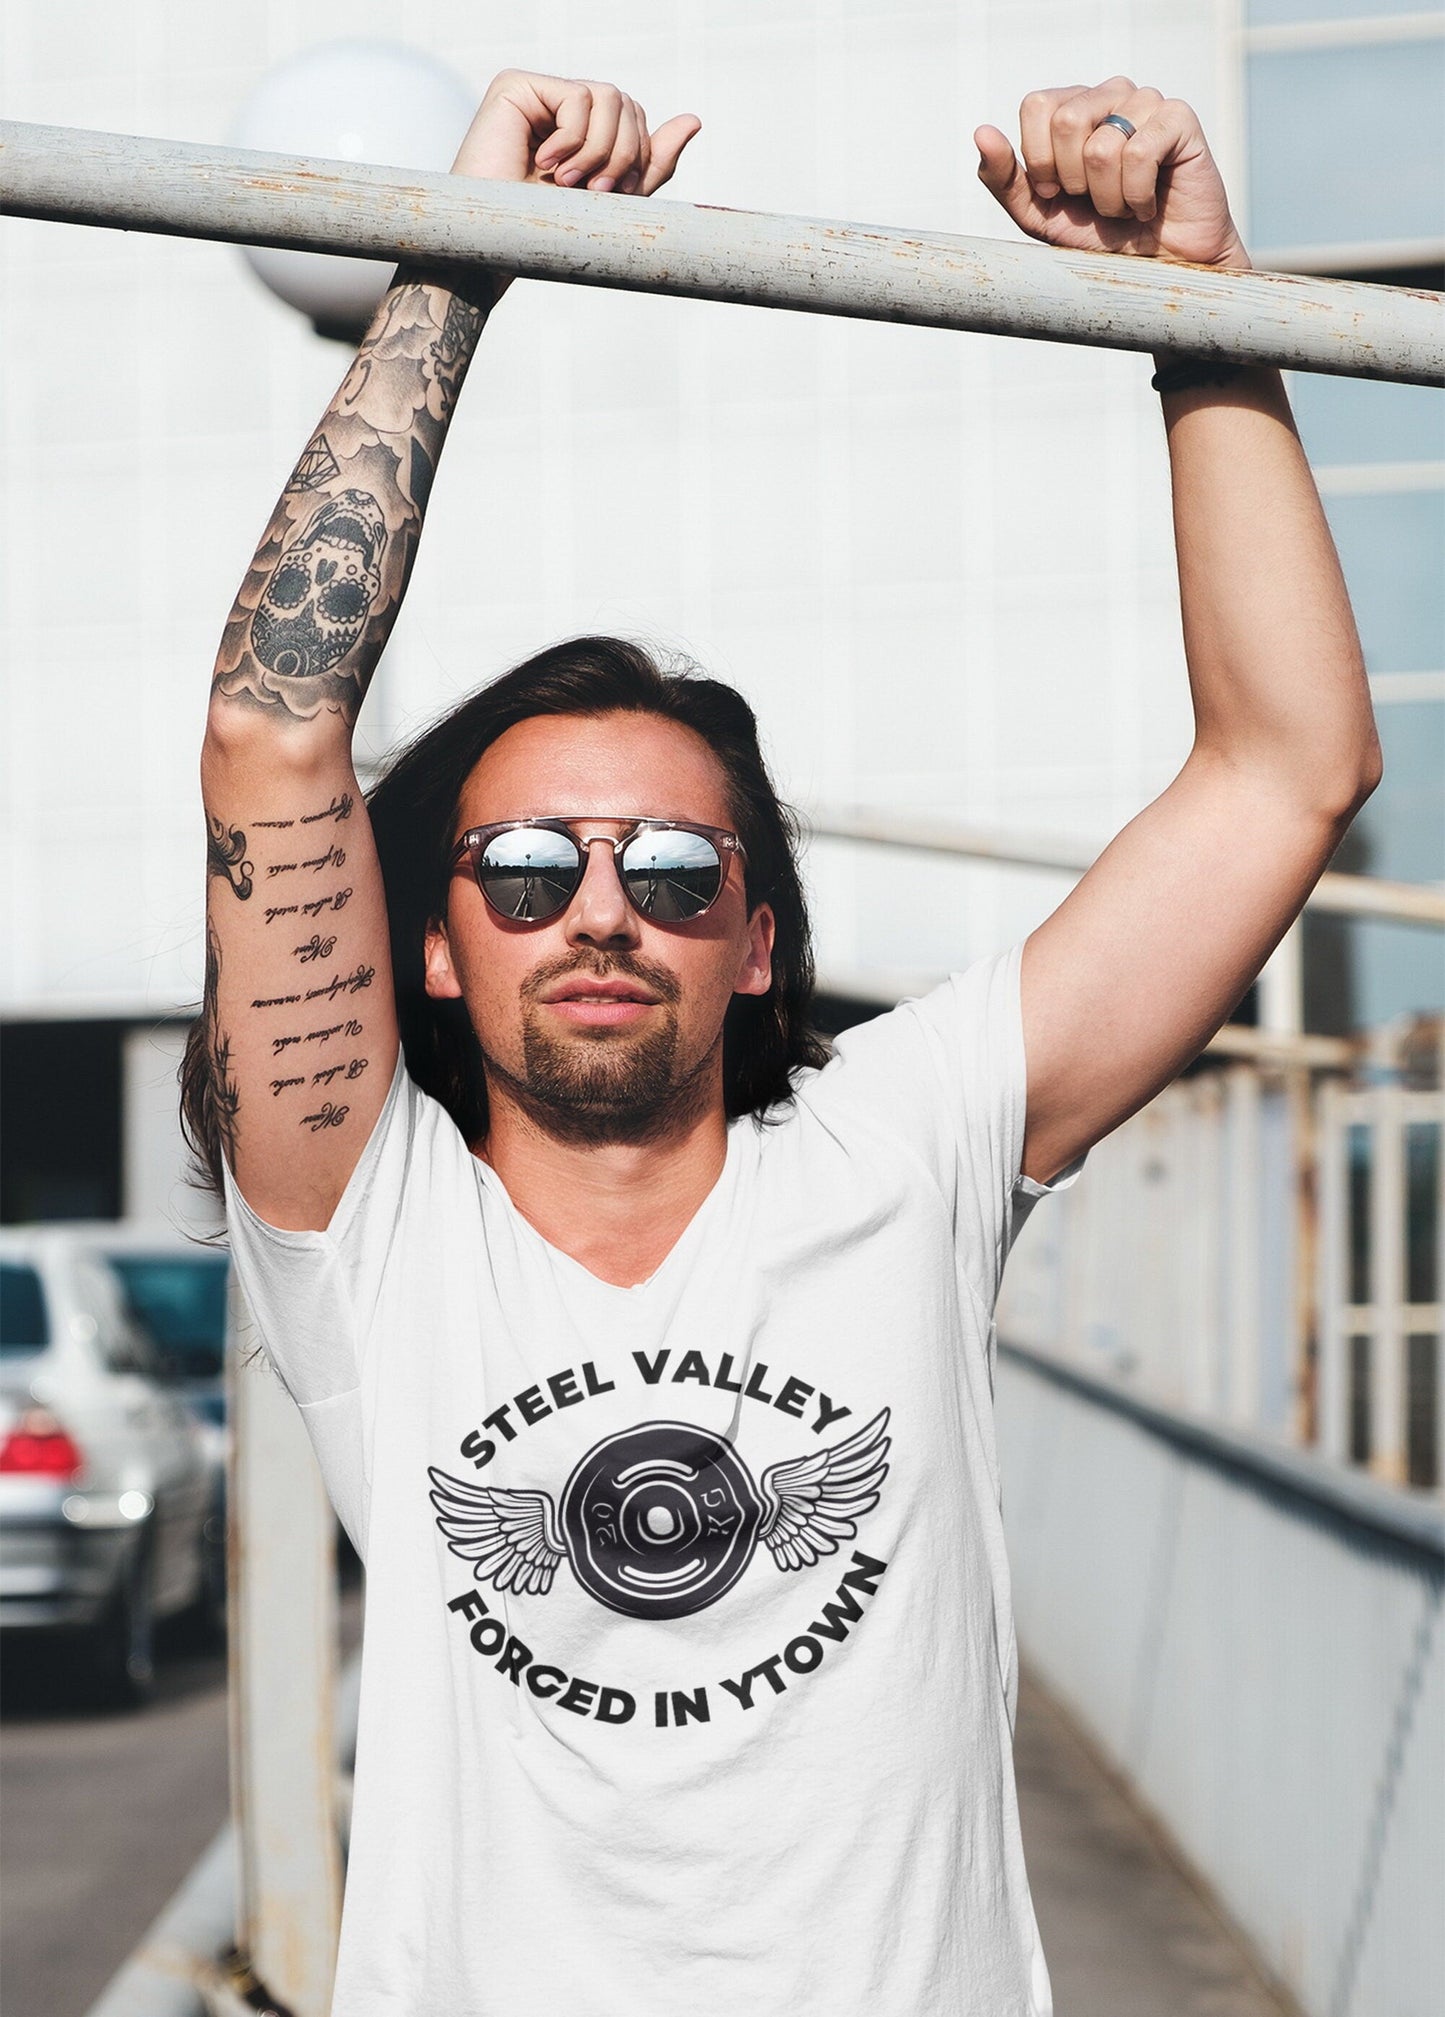 T-Shirt Strong Steel Valley Hometown Pride Custom Shirt & Ink Color, Shirts and Tees, T-Shirt, Tees for Men, Women, and Chilren